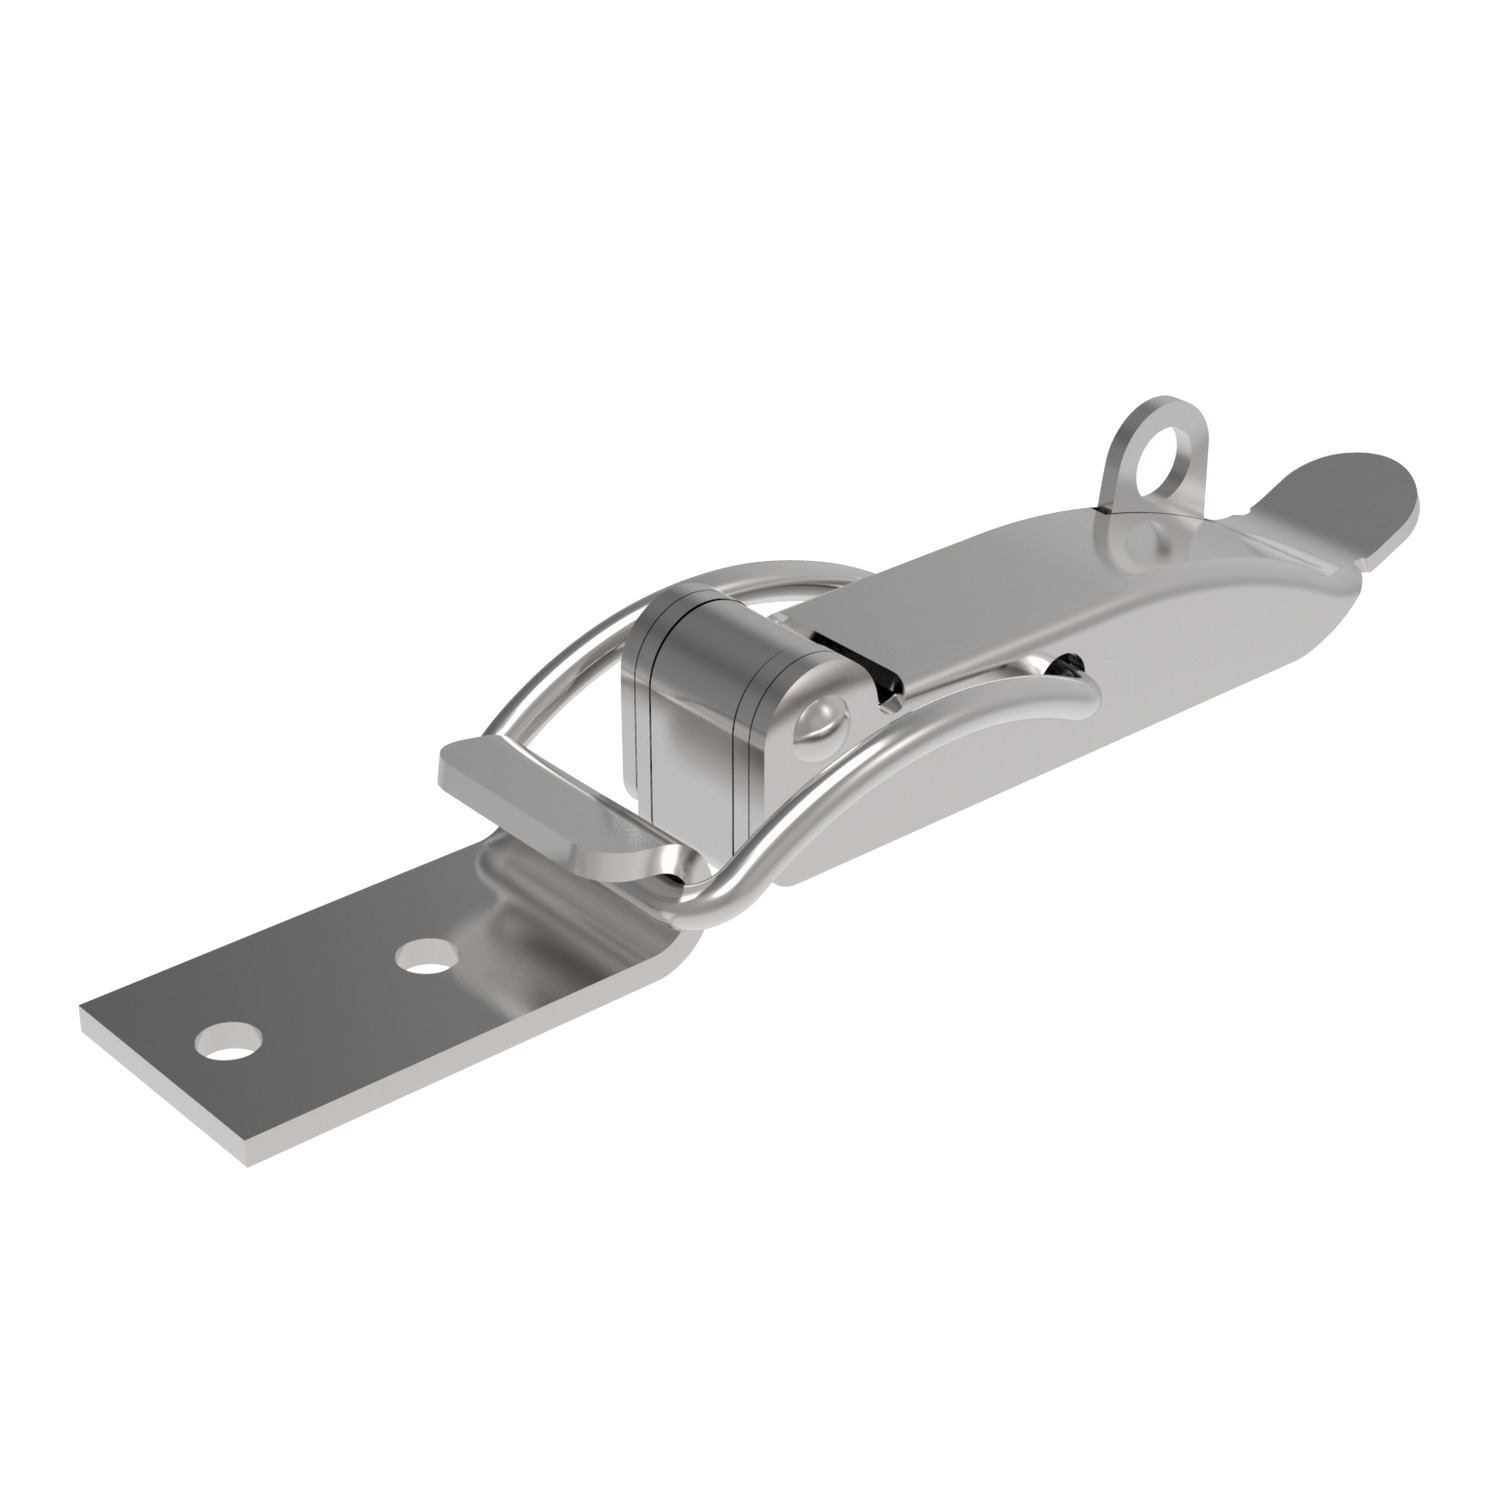 J0552.AC0004 Toggle Latches - Steel or SS. Zinc plated steel. Supplied in multiples of 5